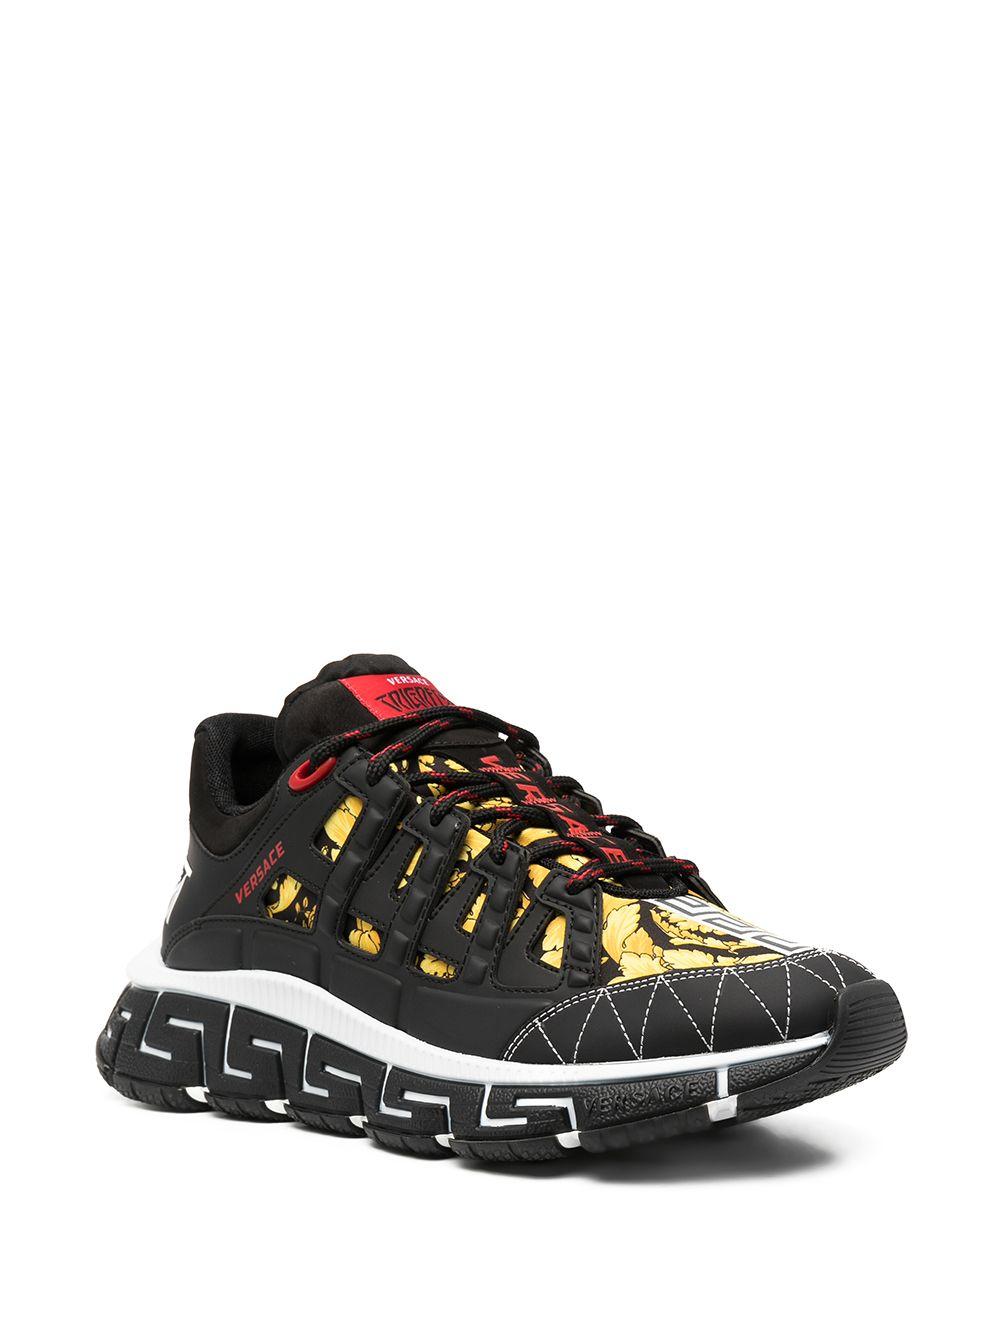 Versace Synthetic Sneakers Black for Men - Save 52% - Lyst